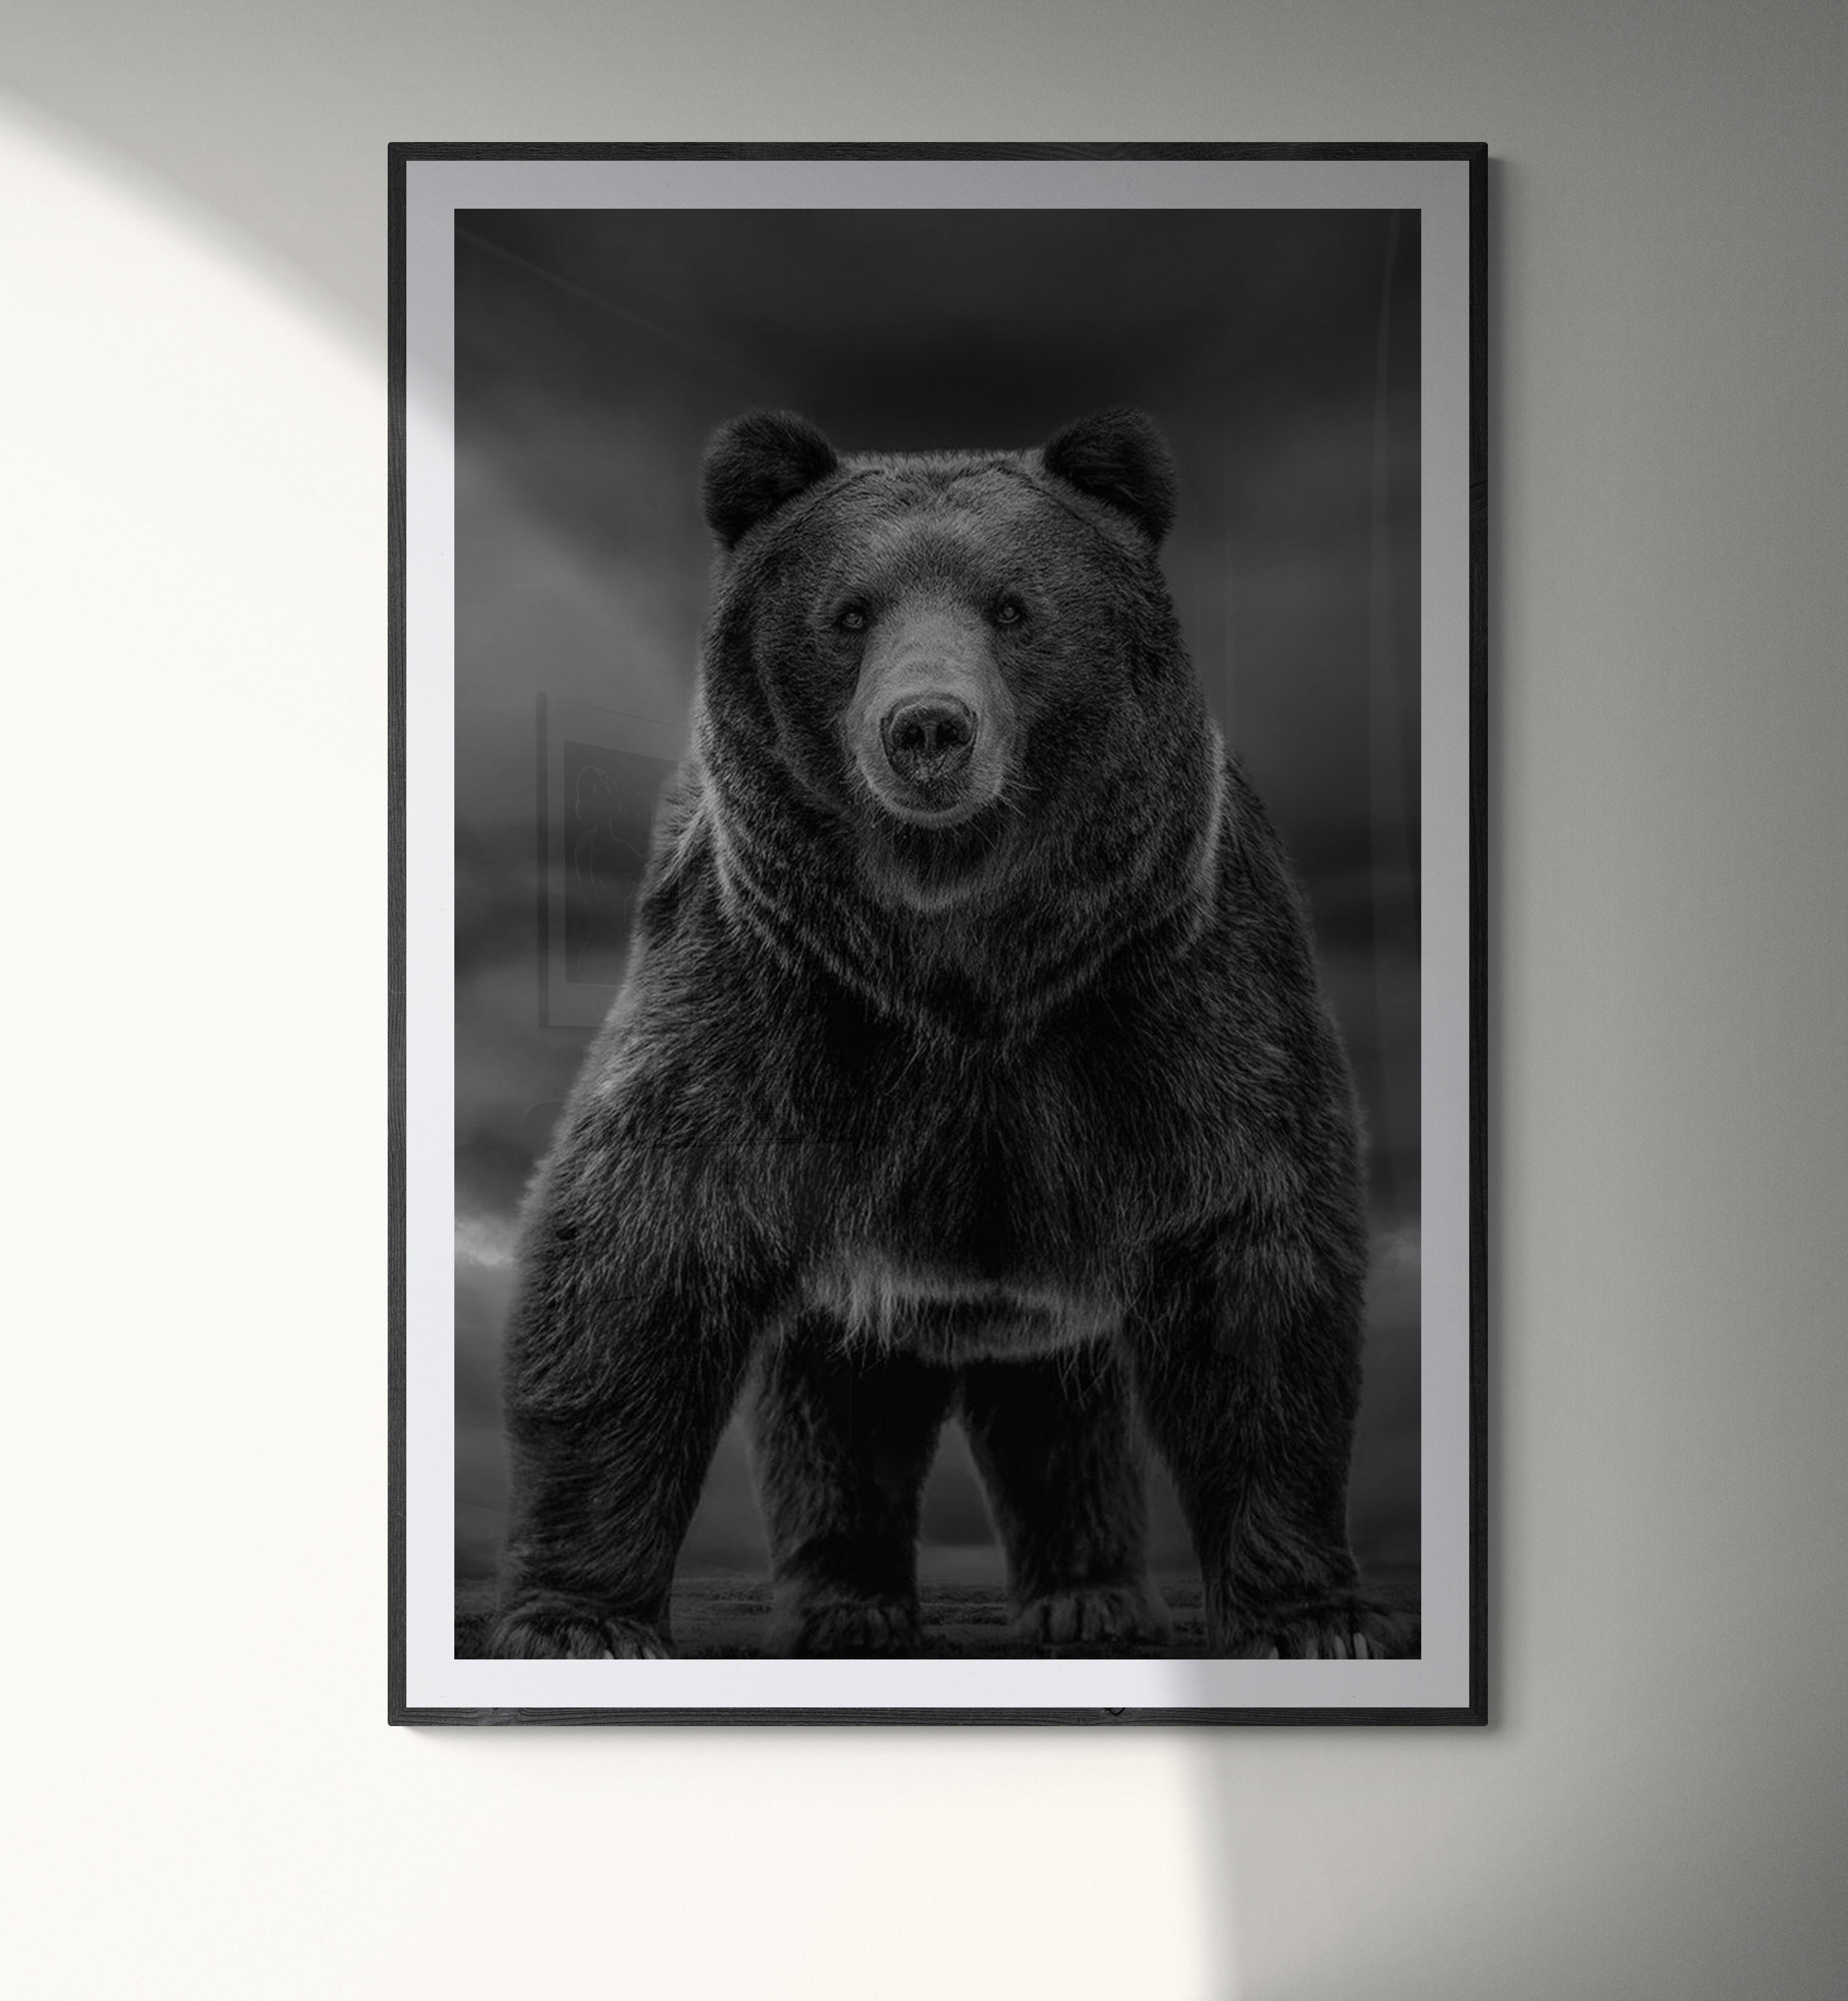 Times Like These 60x40 Black & White Photography, Kodiak, Bear Grizzly Unsigned  1